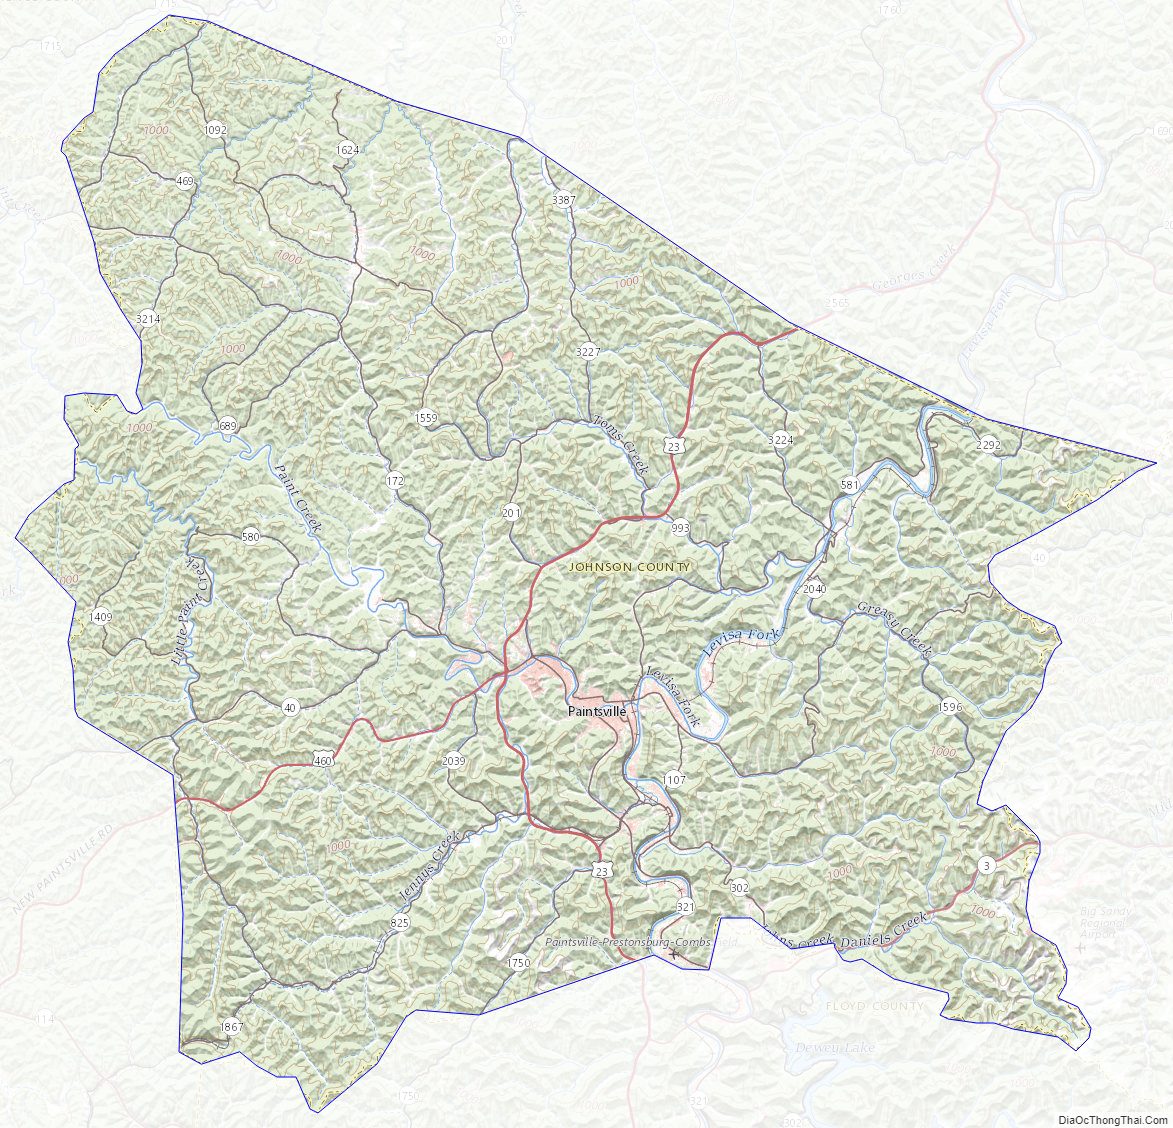 Topographic map of Johnson County, Kentucky